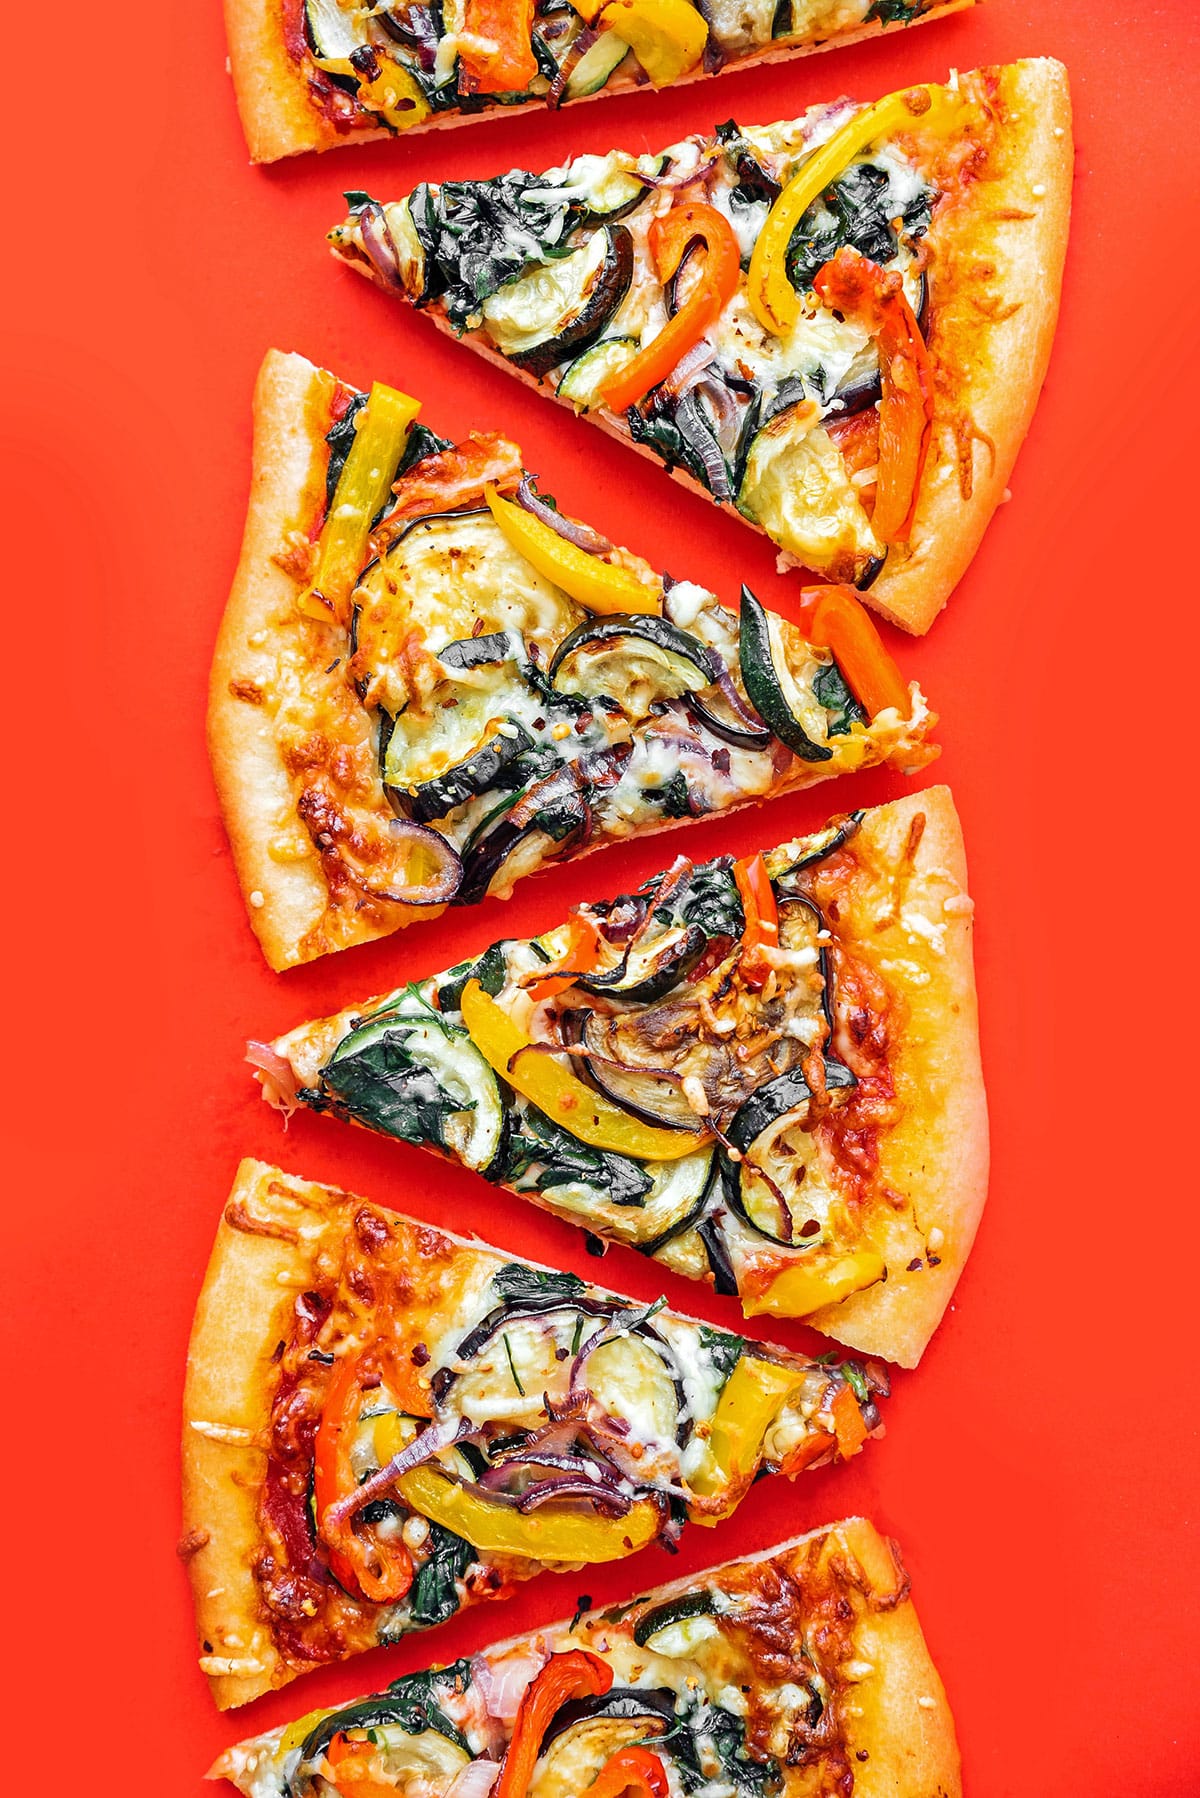 Veggie pizza on a red background.